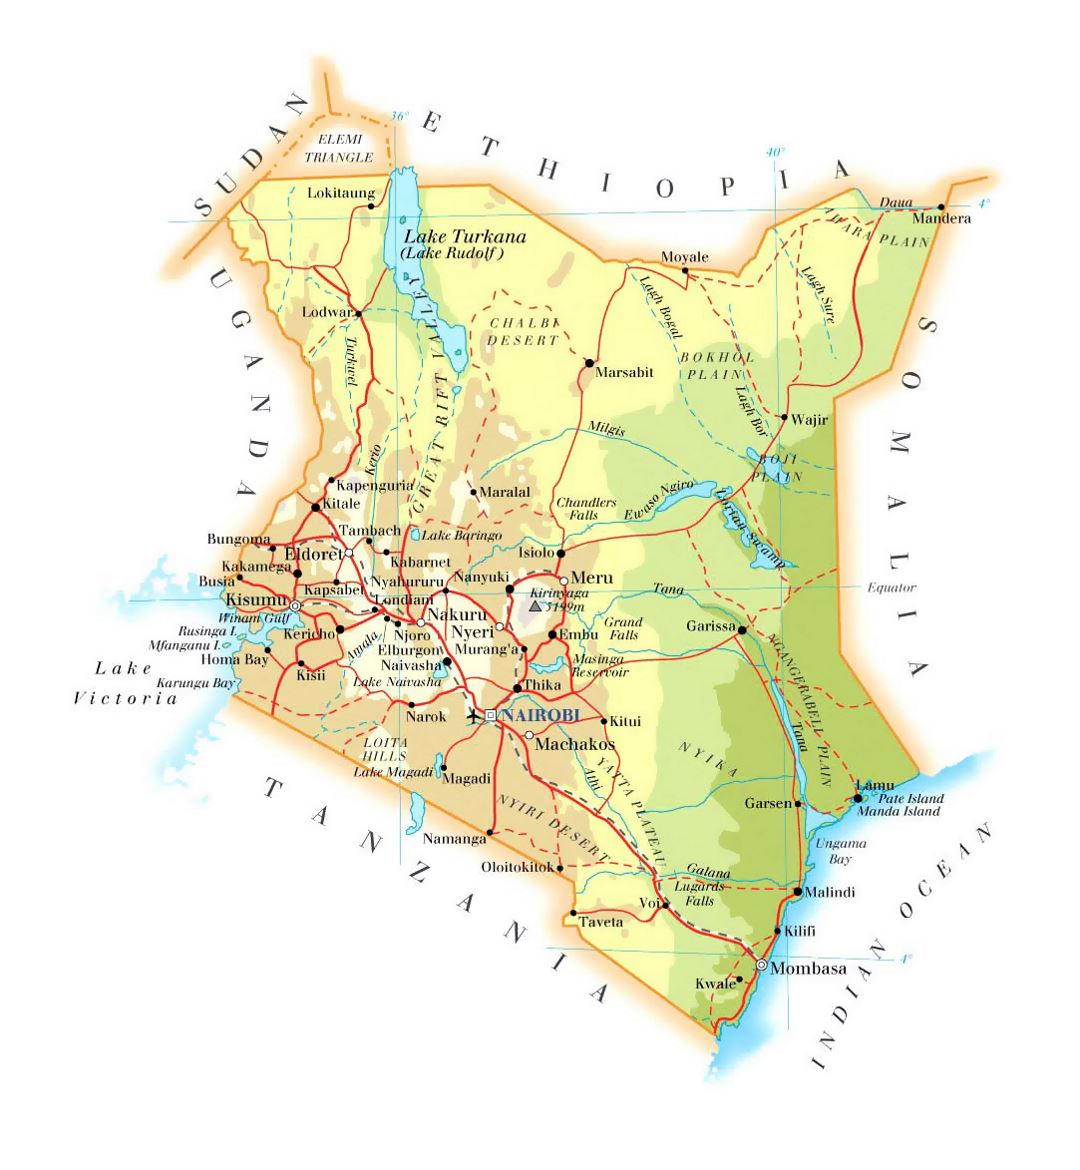 Detailed elevation map of Kenya with roads, cities and airports